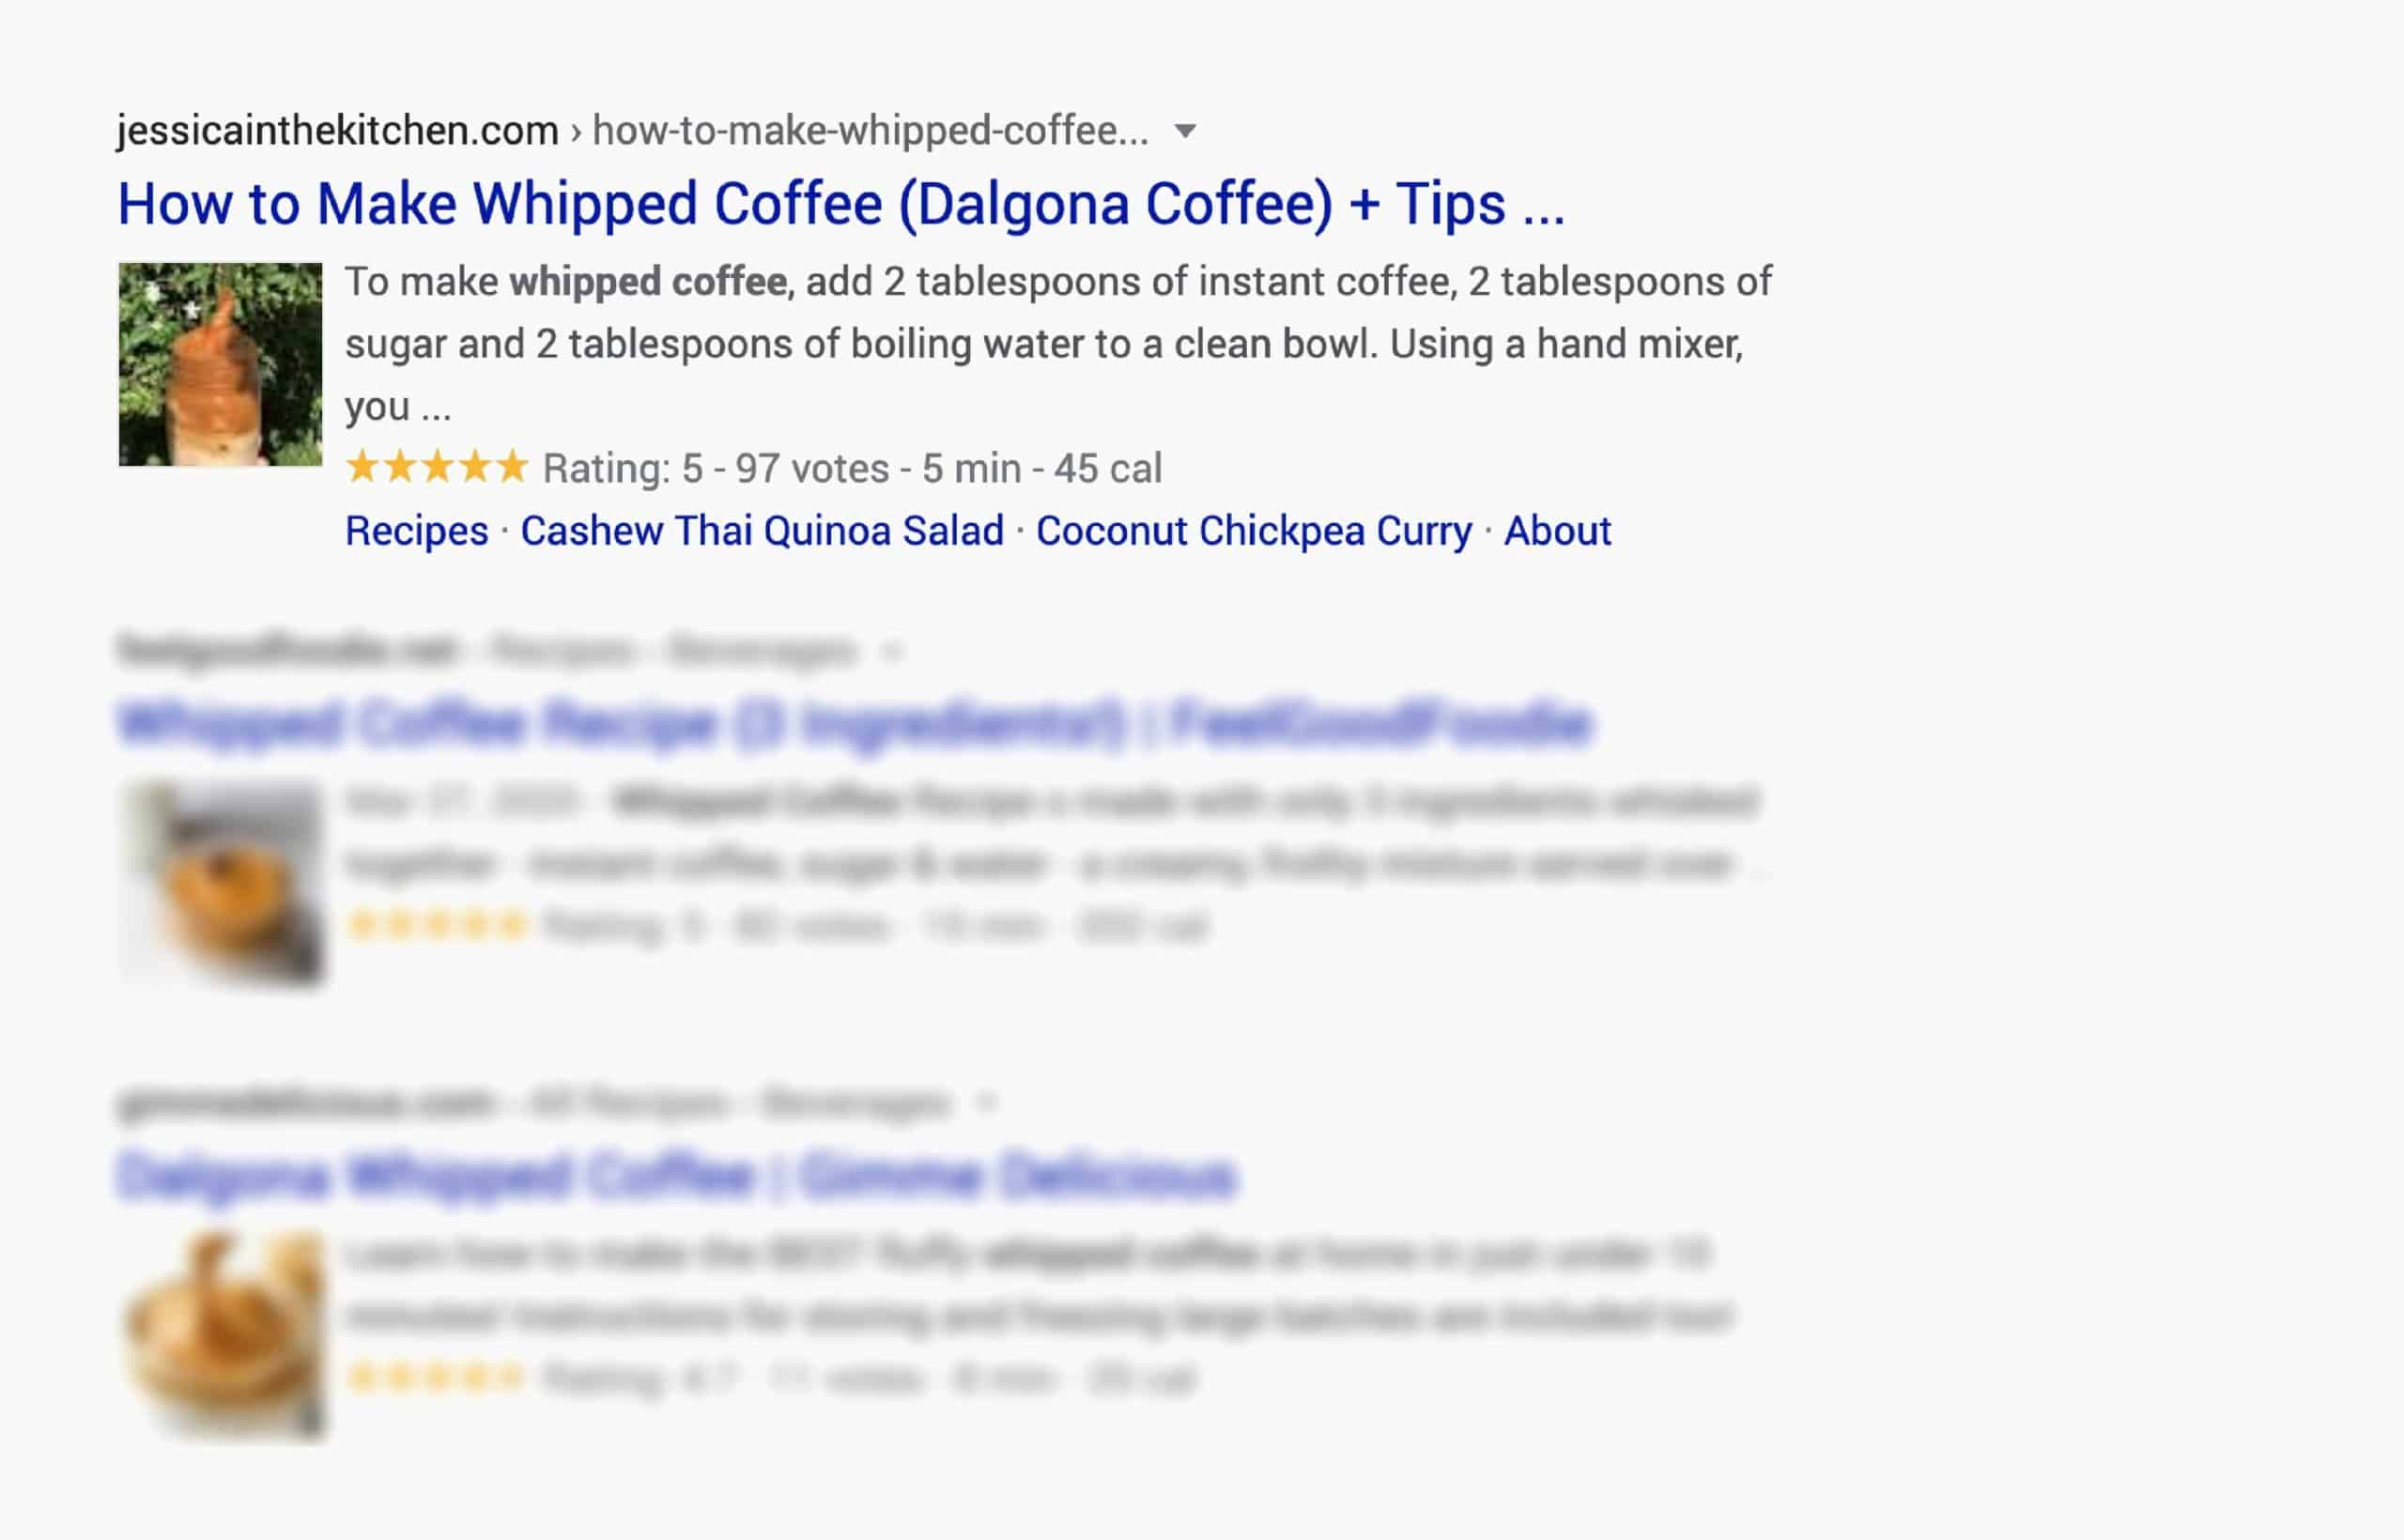 whipped coffee serp